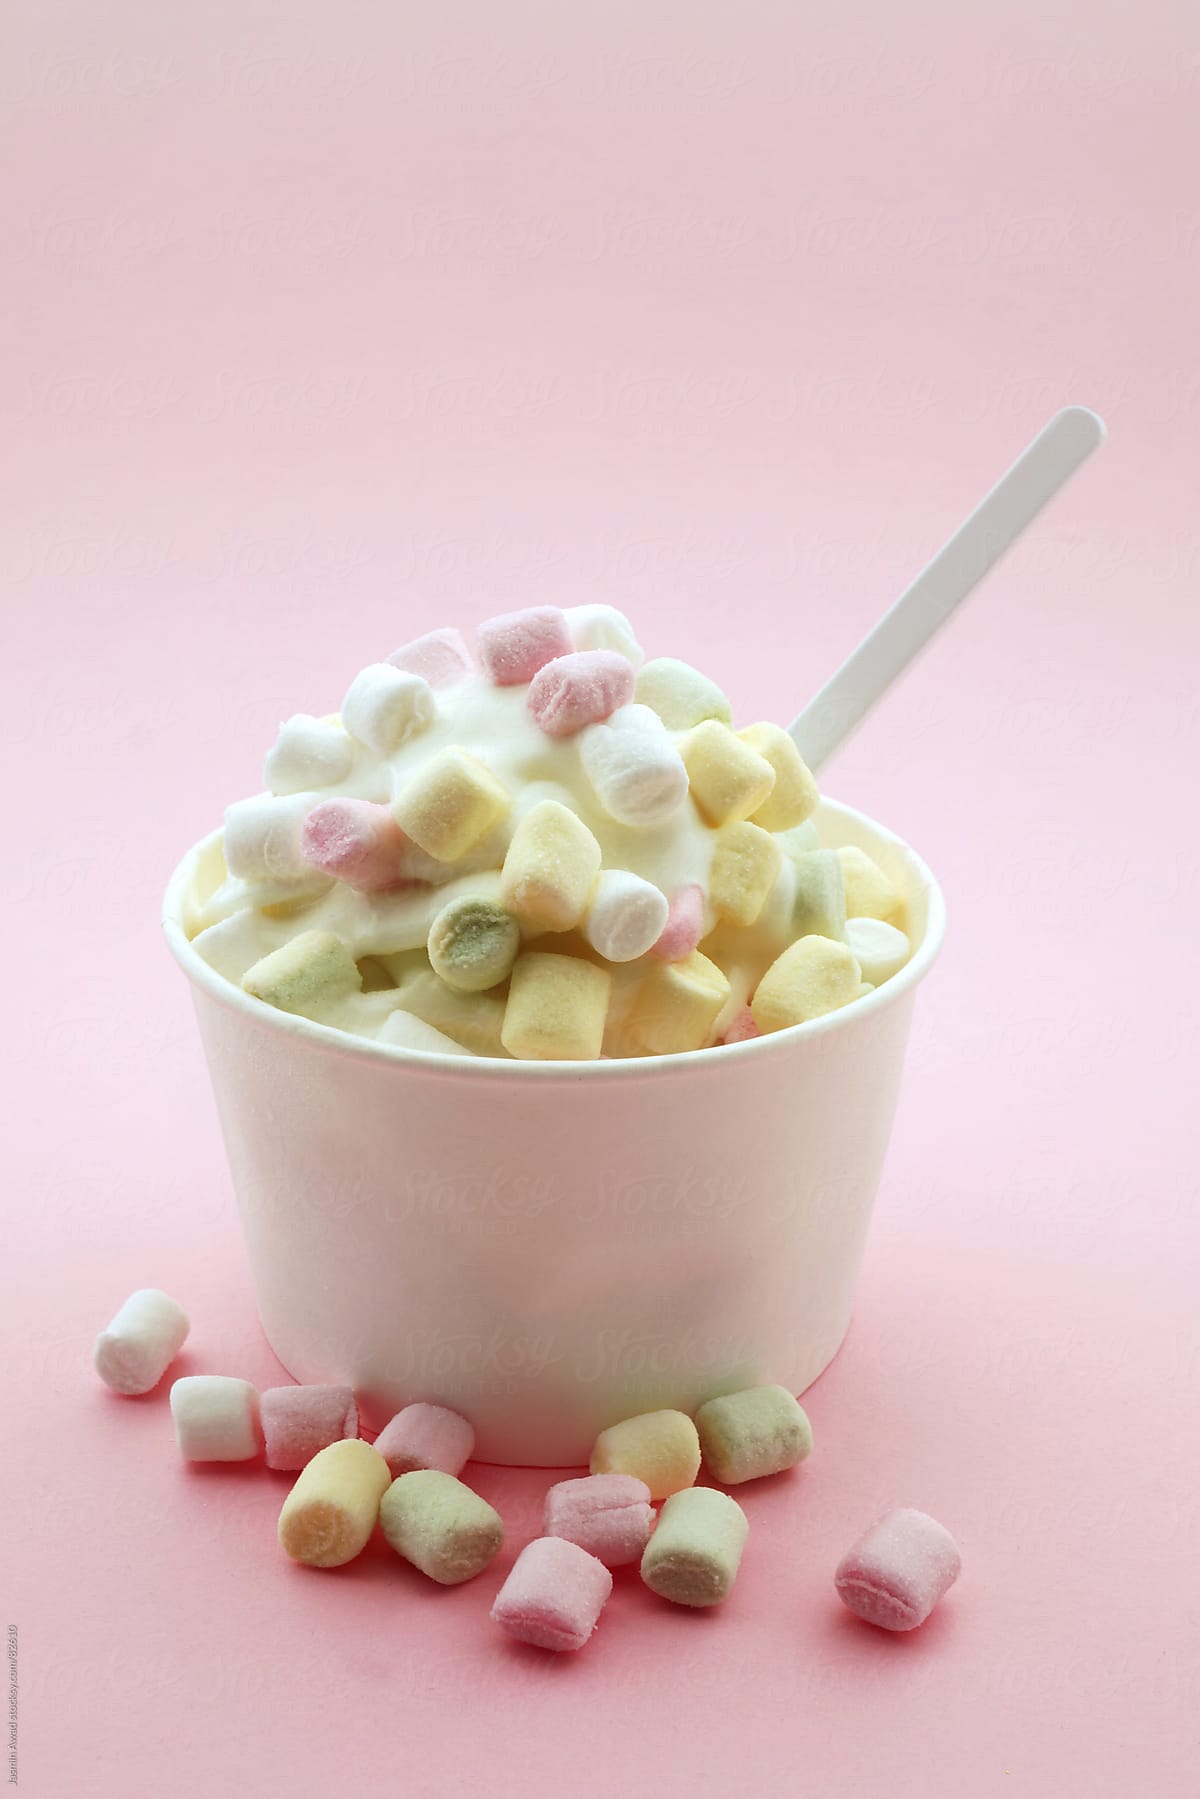 A bowl of ice cream with marshmallows on a pink background - Marshmallows